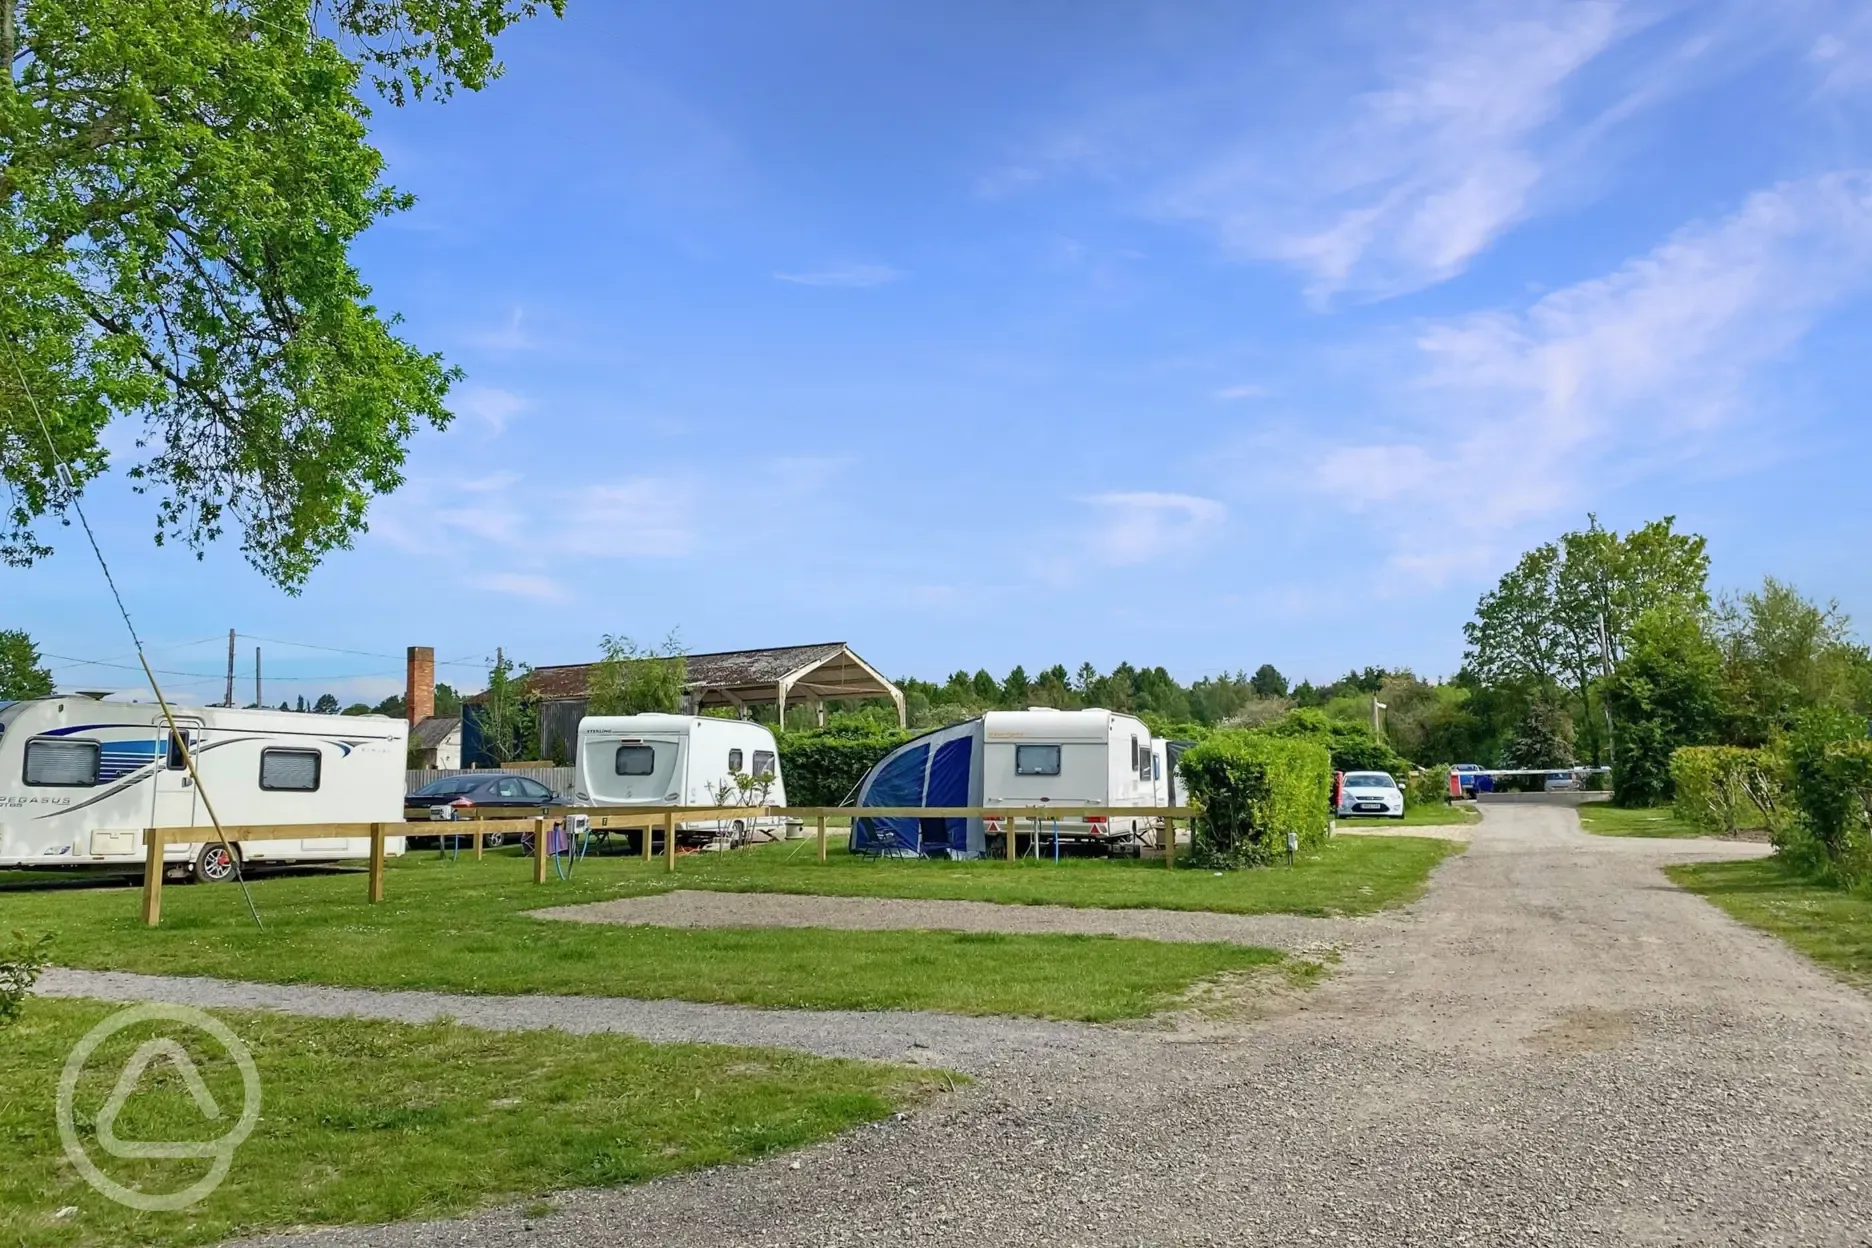 Serviced hardstanding pitches